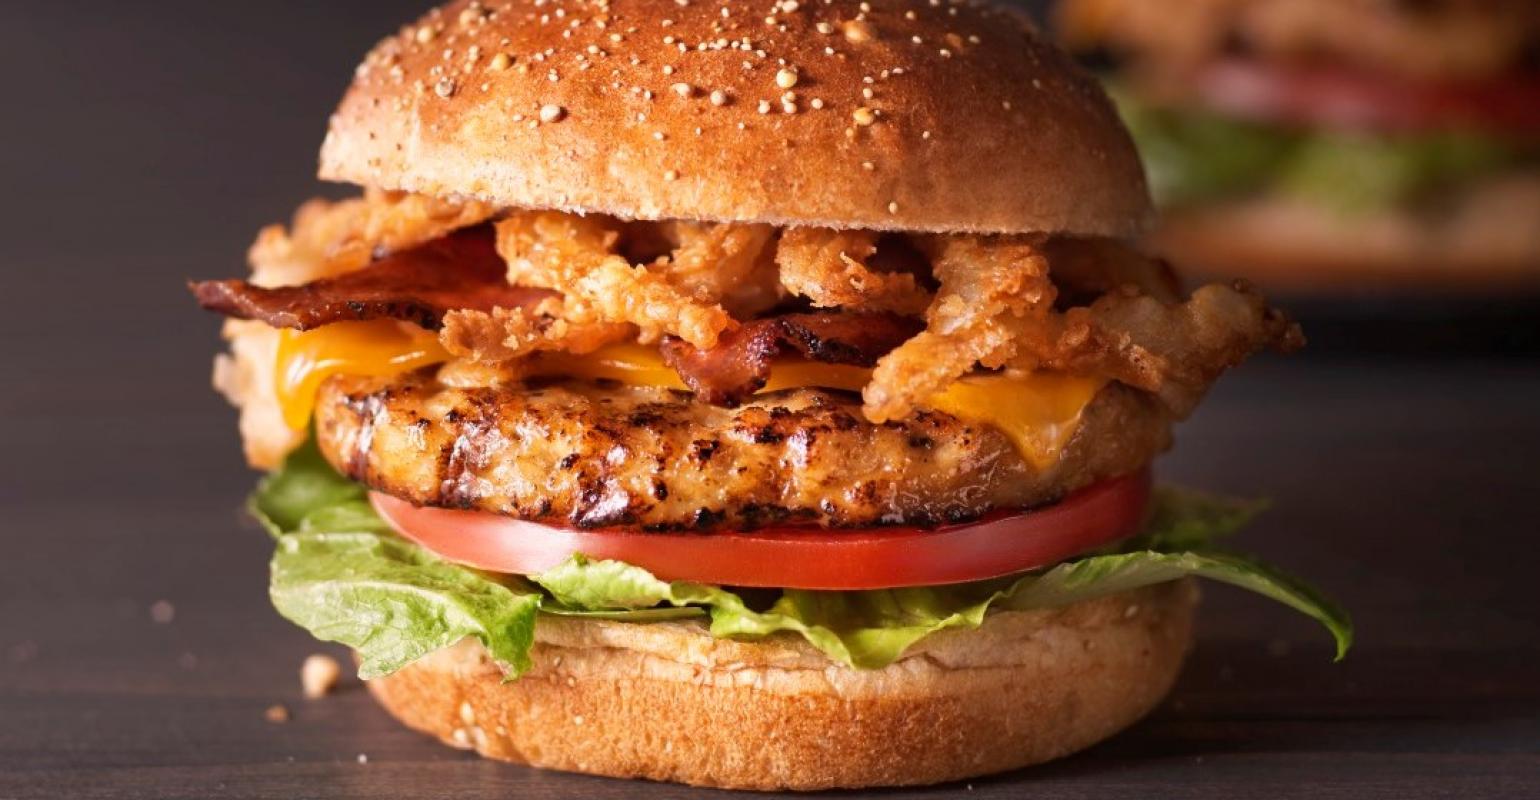 New Grilled Chicken Burger Is Ideal for Numerous Burger Applications